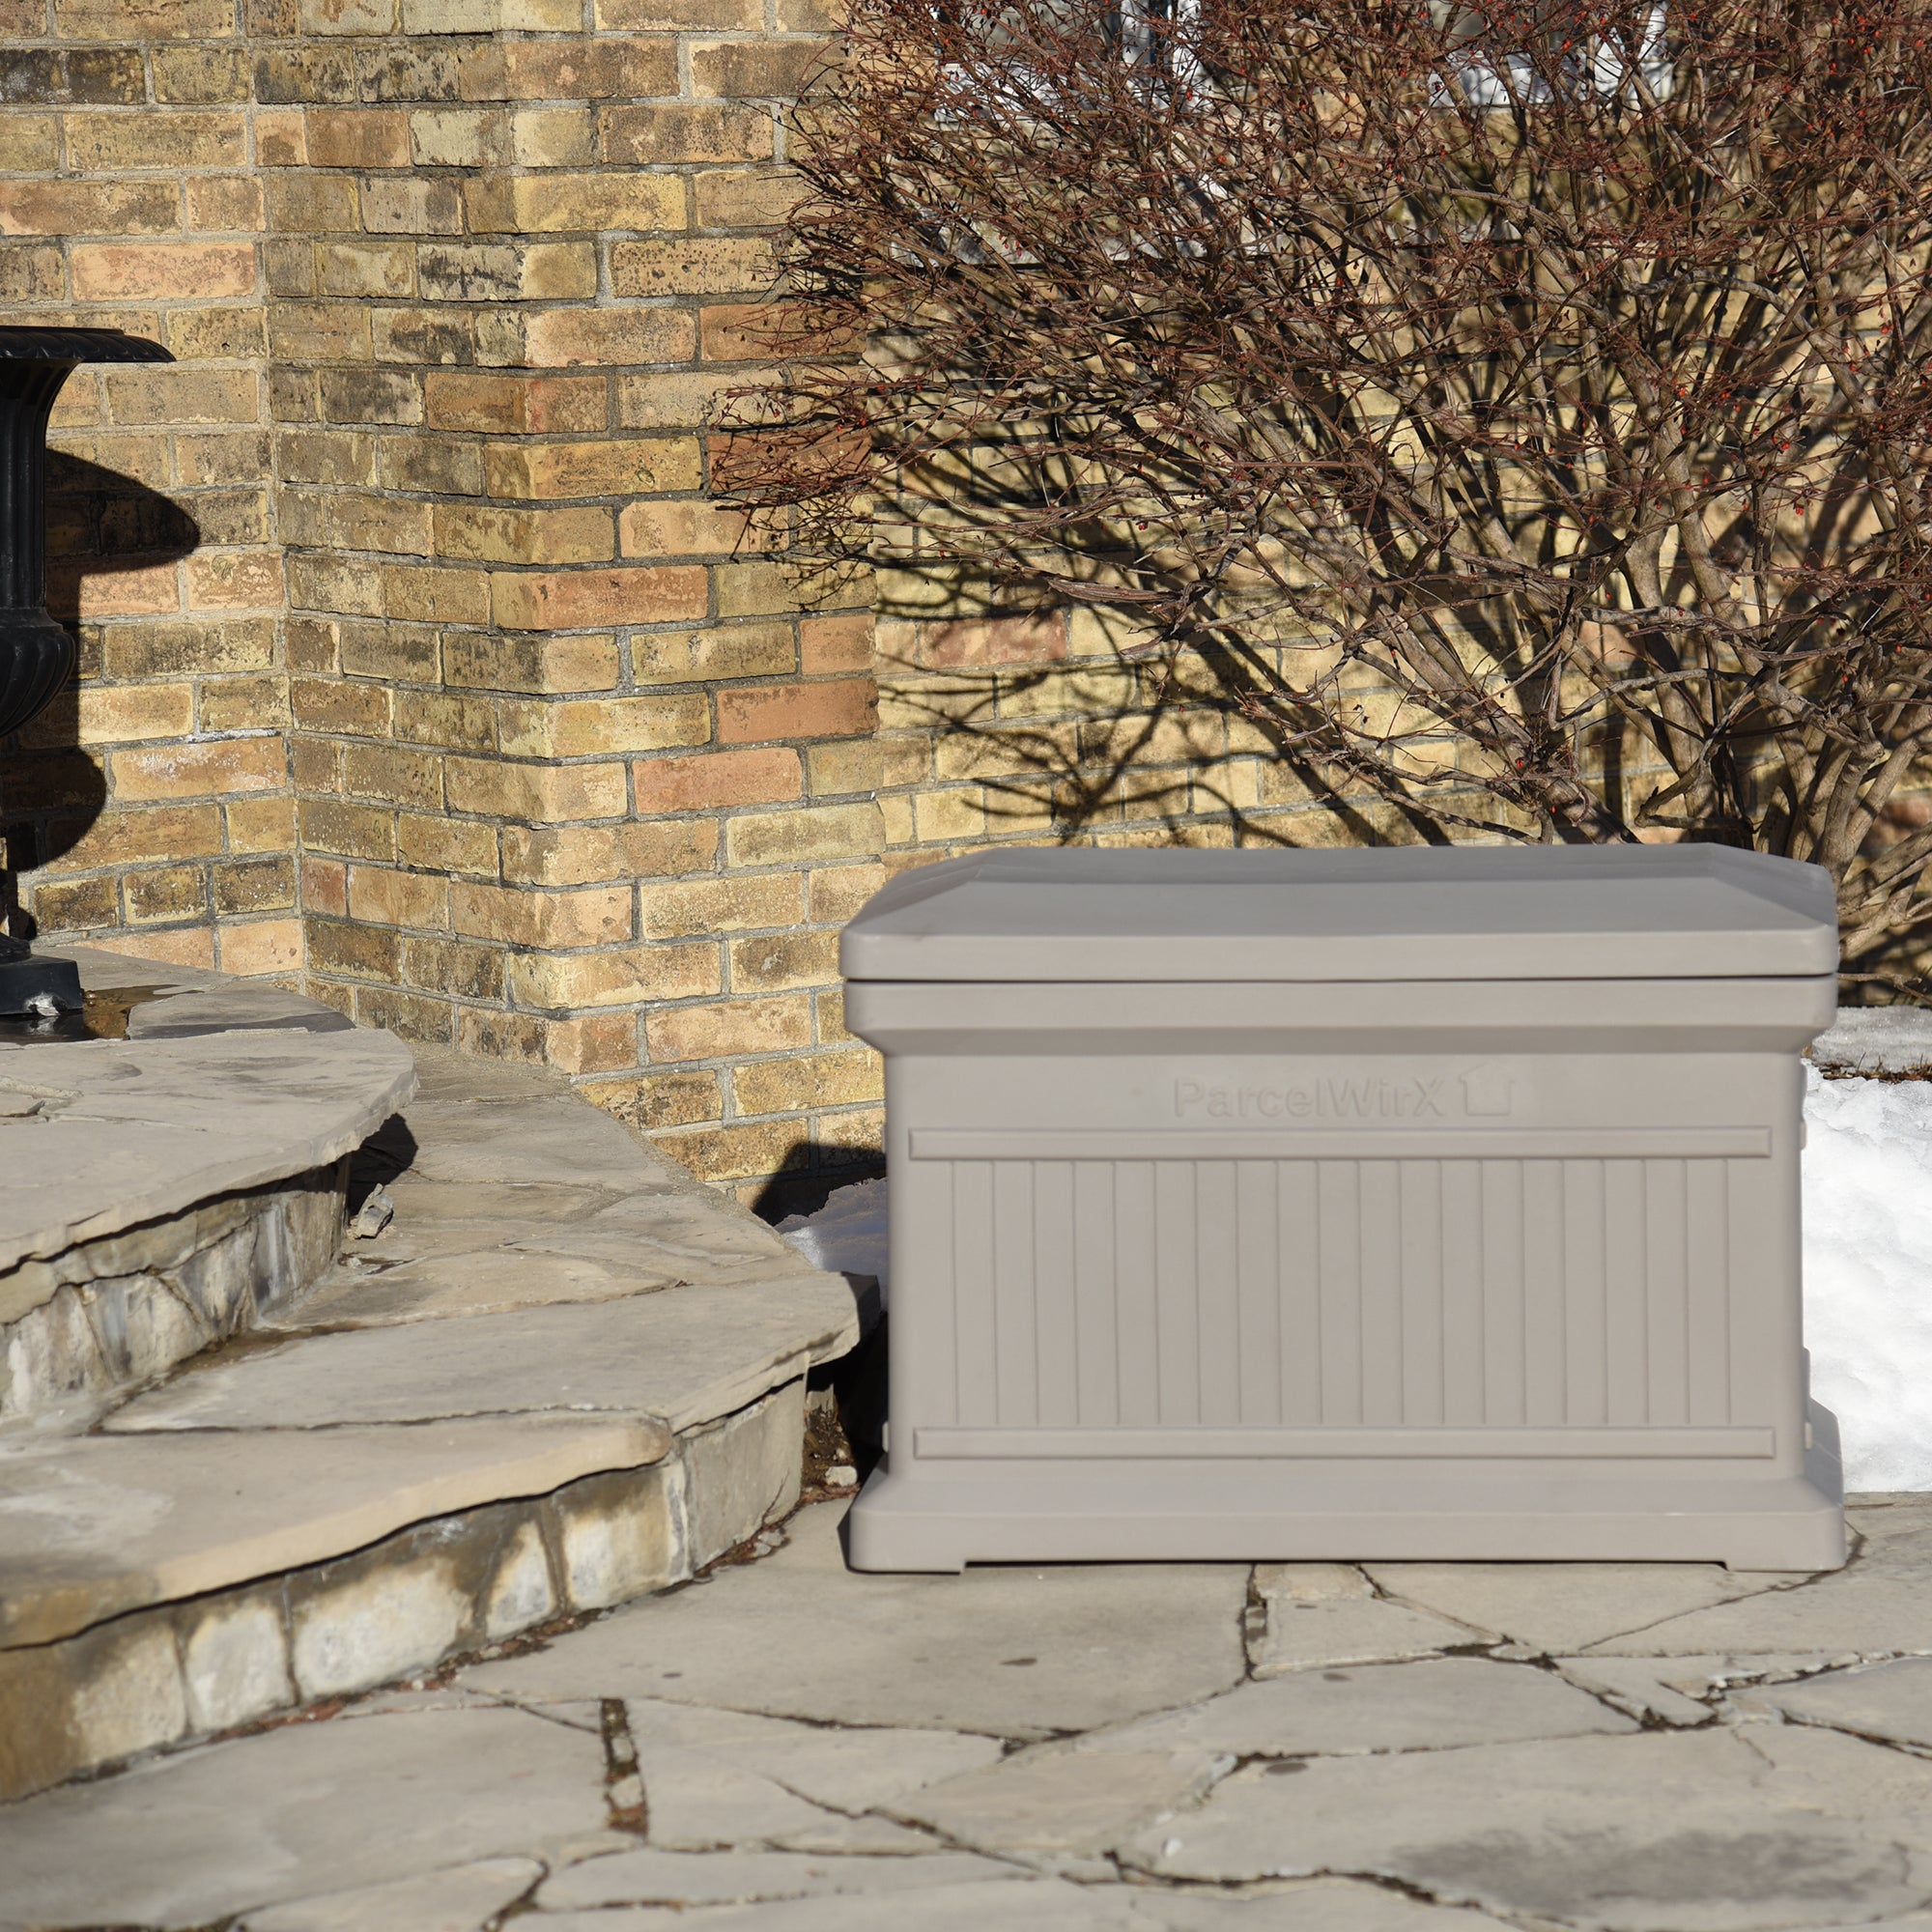 Prestige Pewter ParcelWirx horizontal standard from the front with the lid on, on a front porch